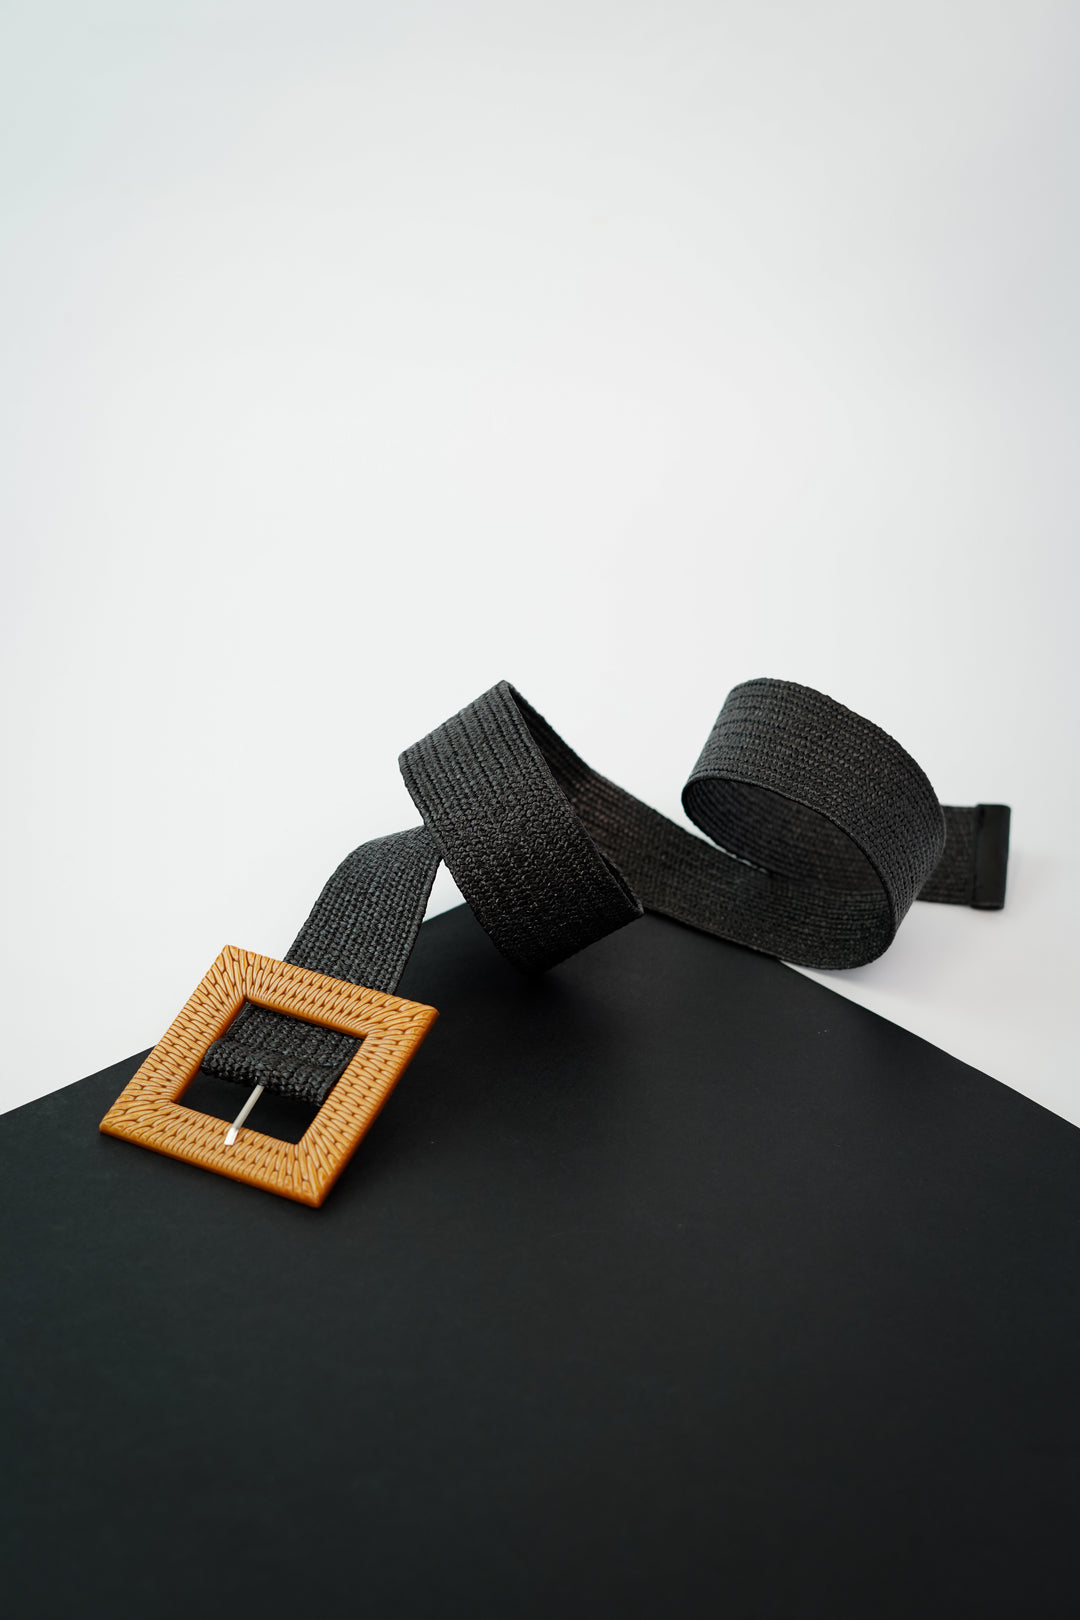 Refined Elegance Coal Craft Belt with Stretchable Comfort